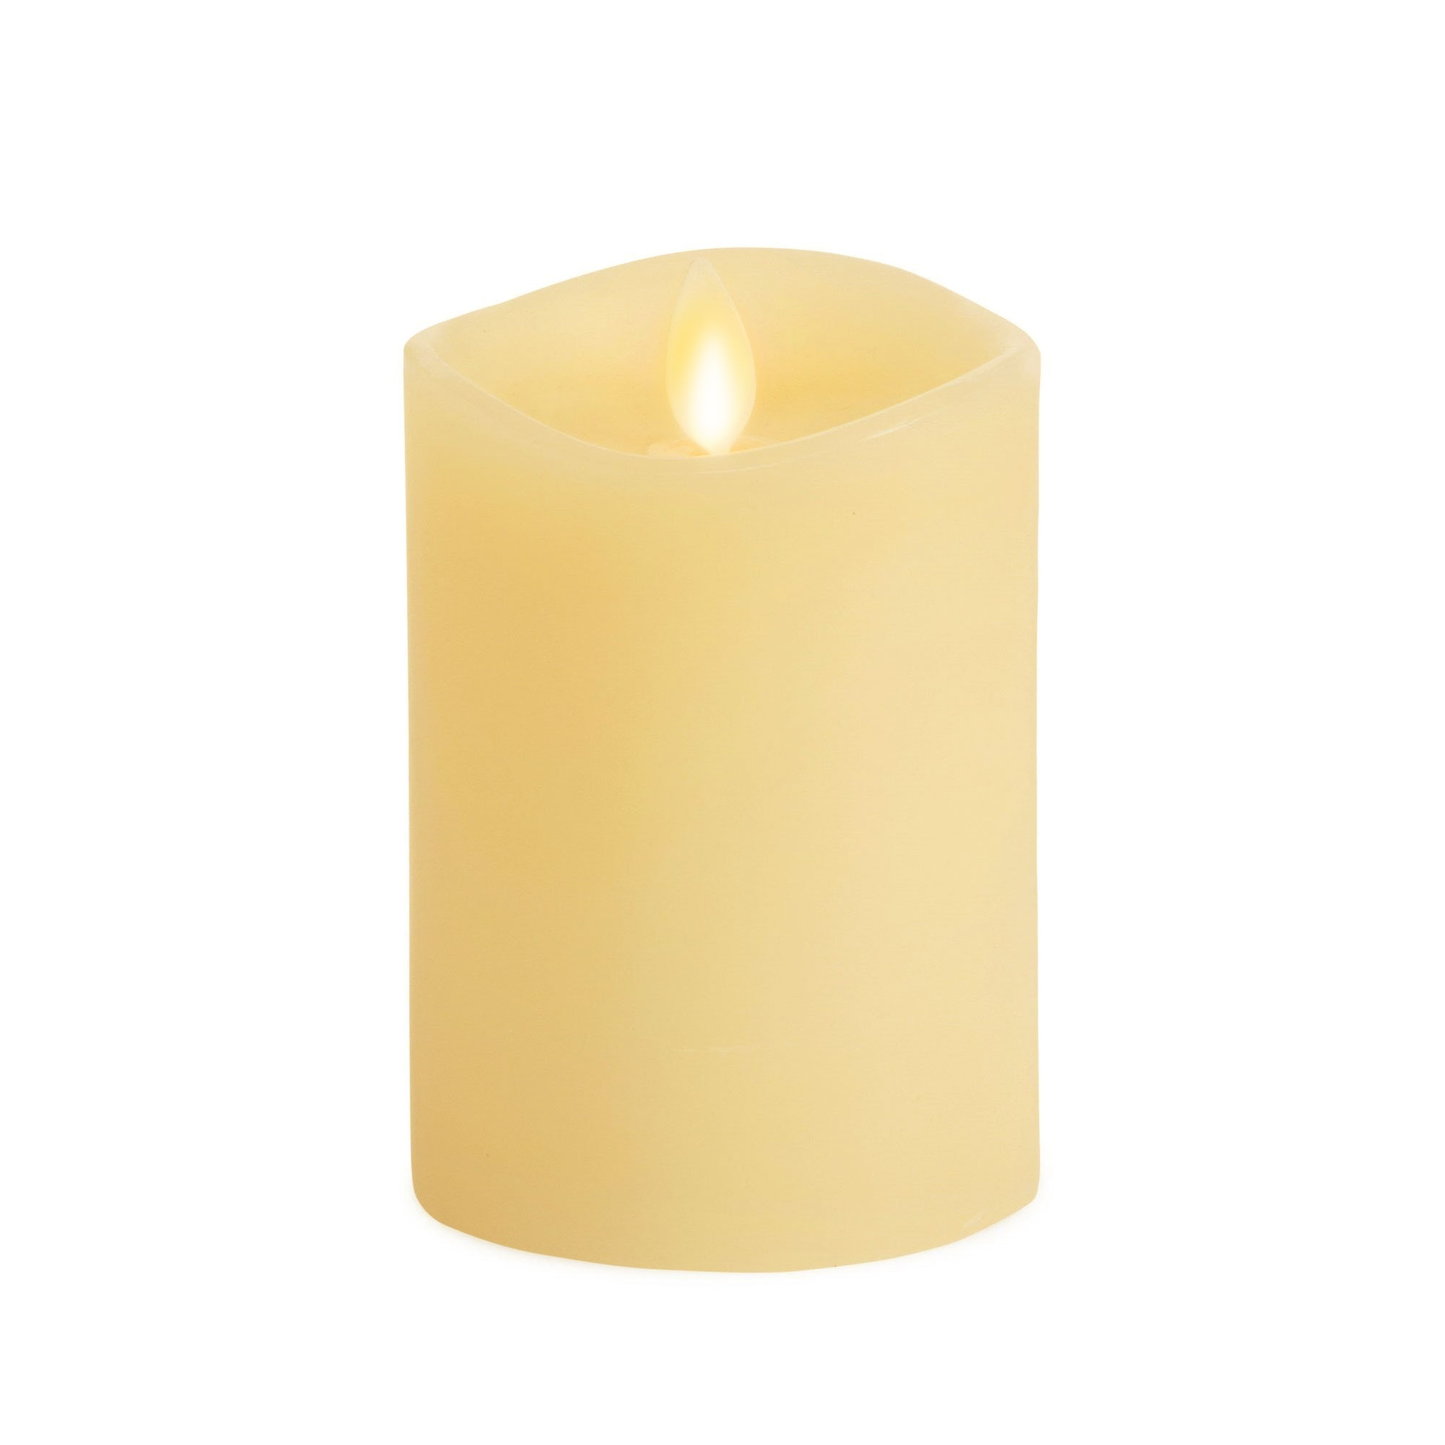 Ivory Flameless Candle Pillar - Melted Top - 3" Width